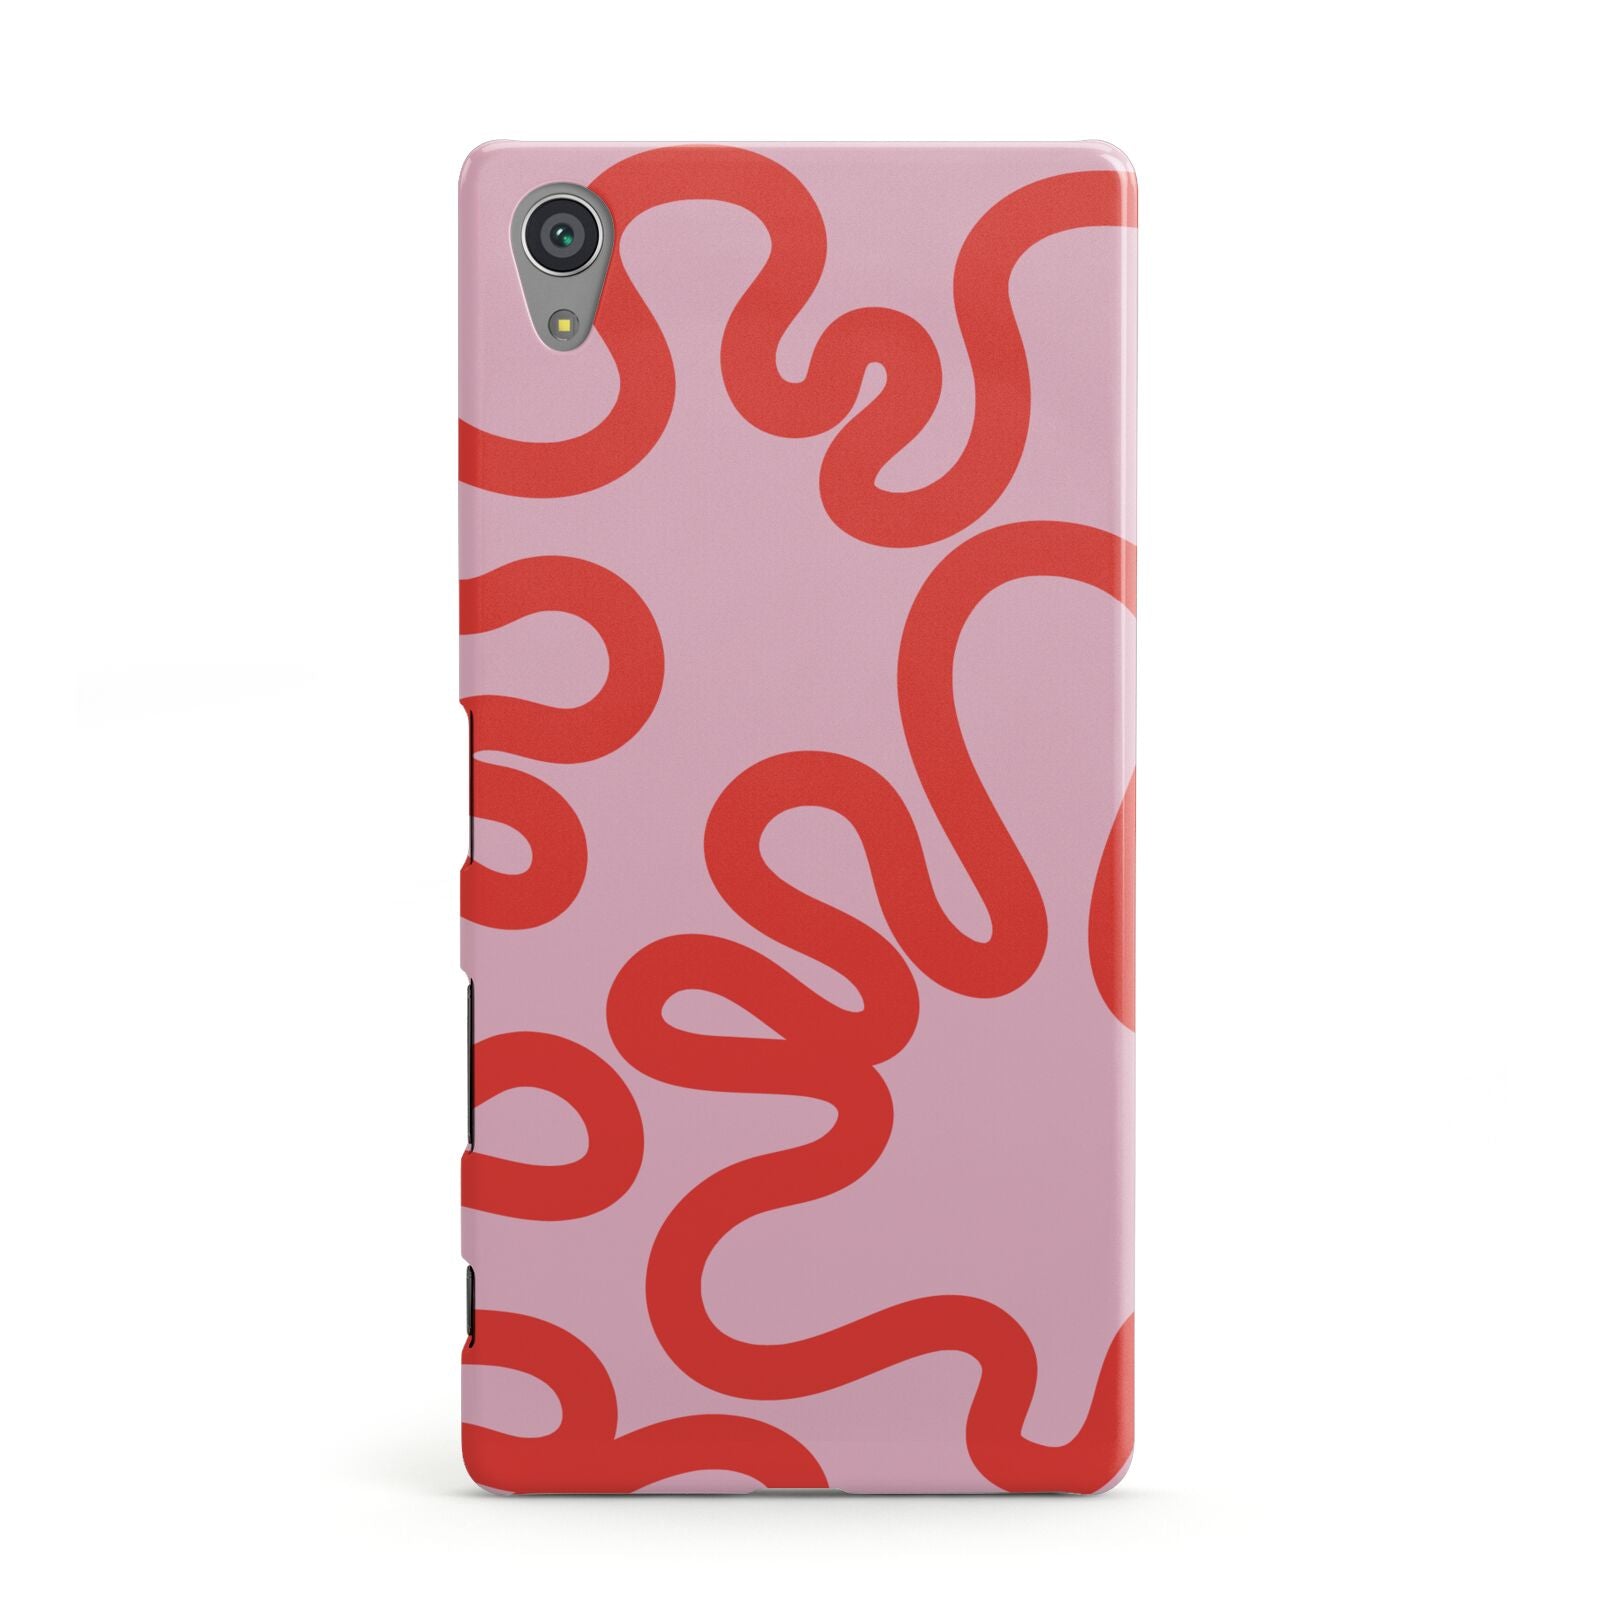 Squiggle Sony Xperia Case